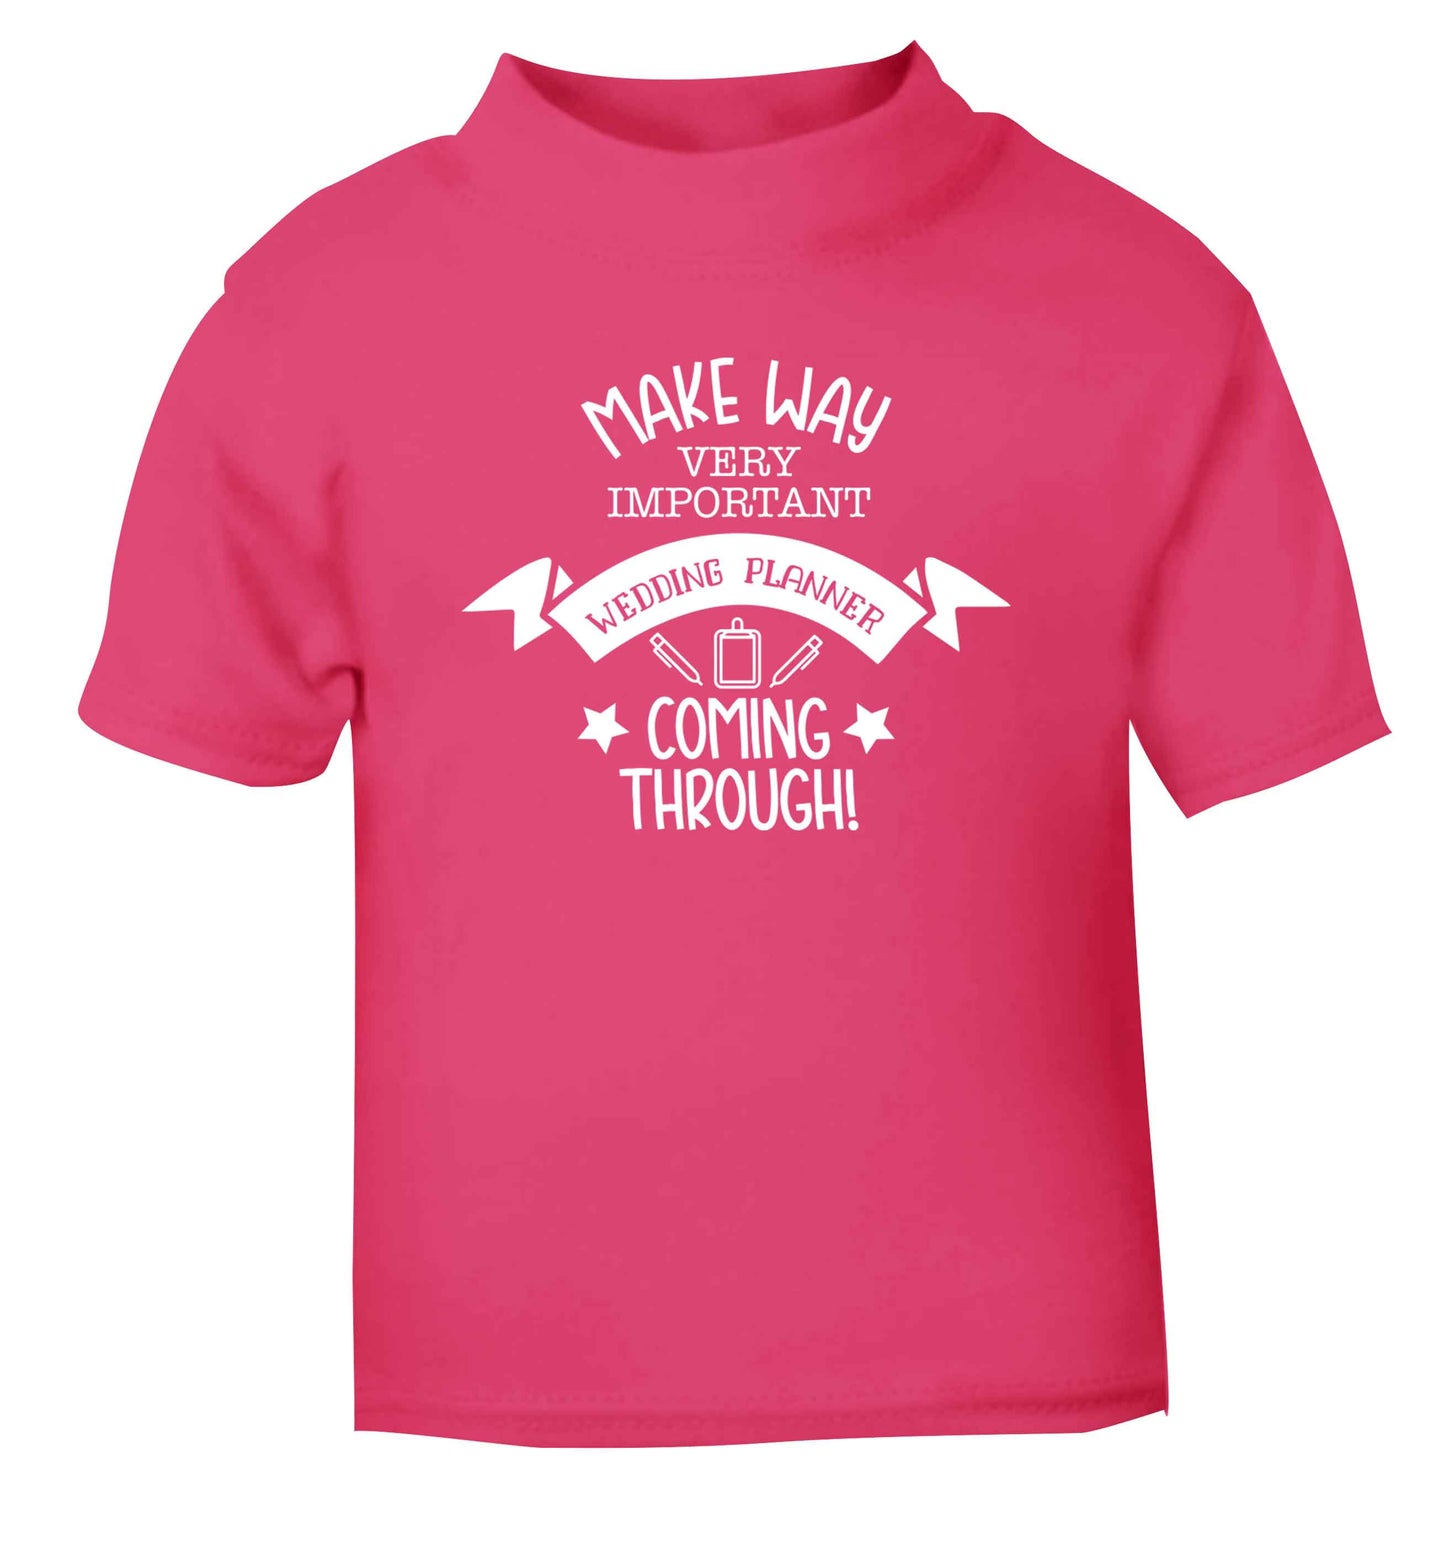 Make way very important wedding planner coming through pink Baby Toddler Tshirt 2 Years